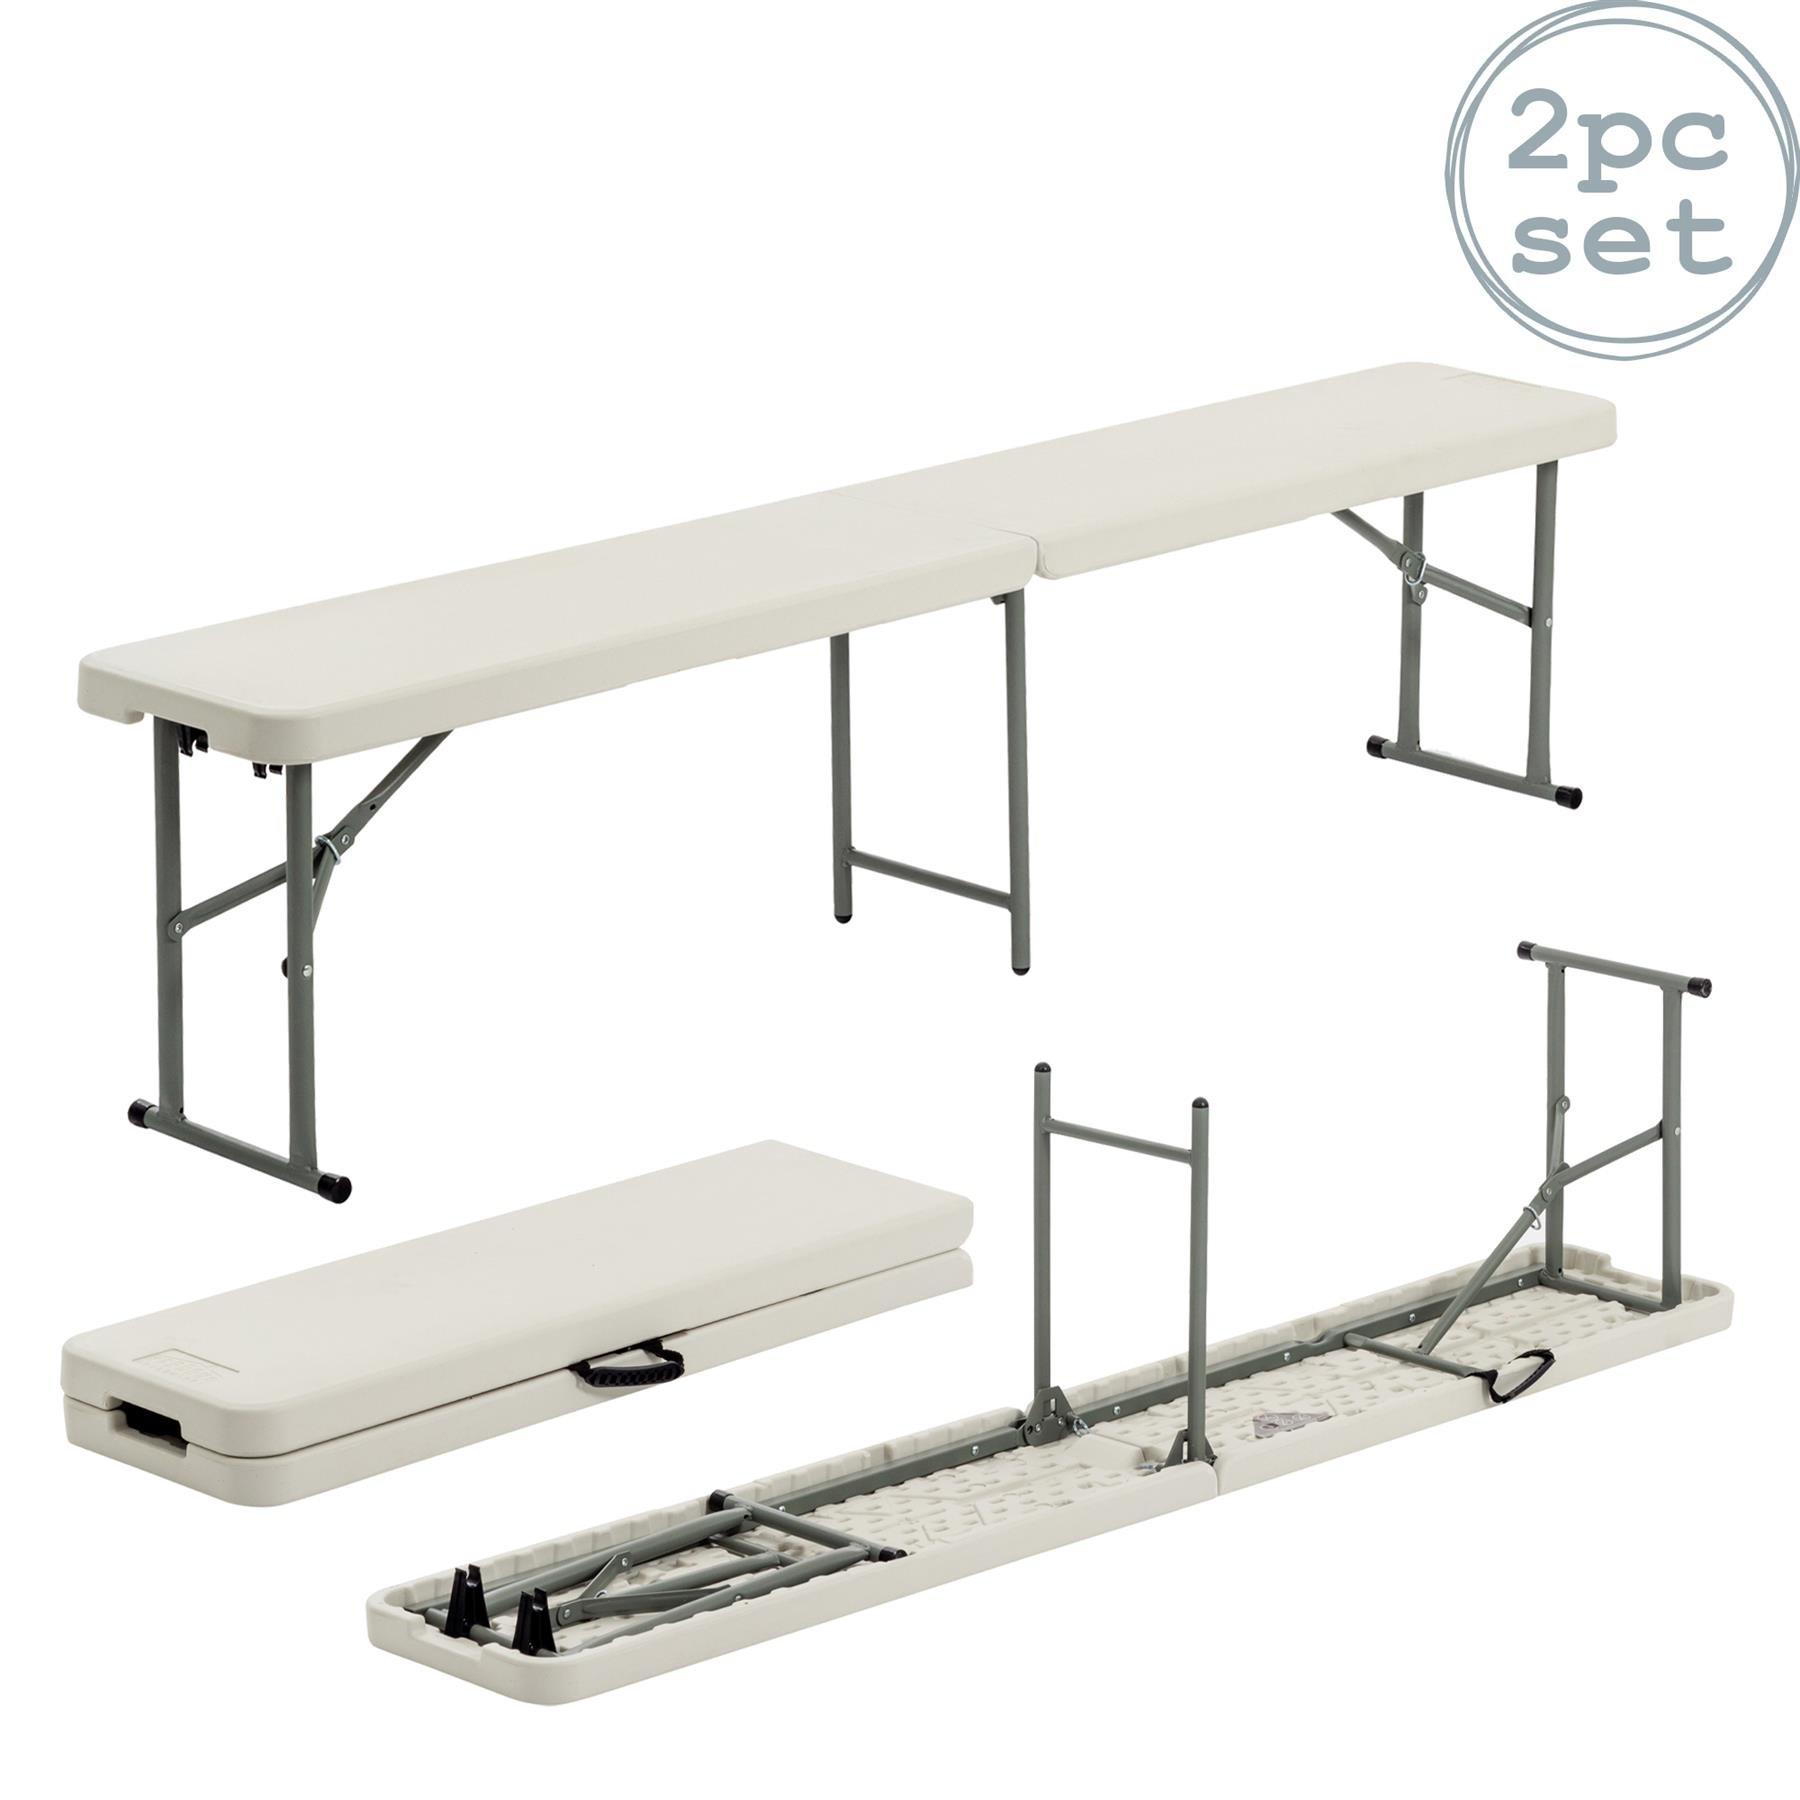 4 Person Folding Trestle Benches White Pack of 2